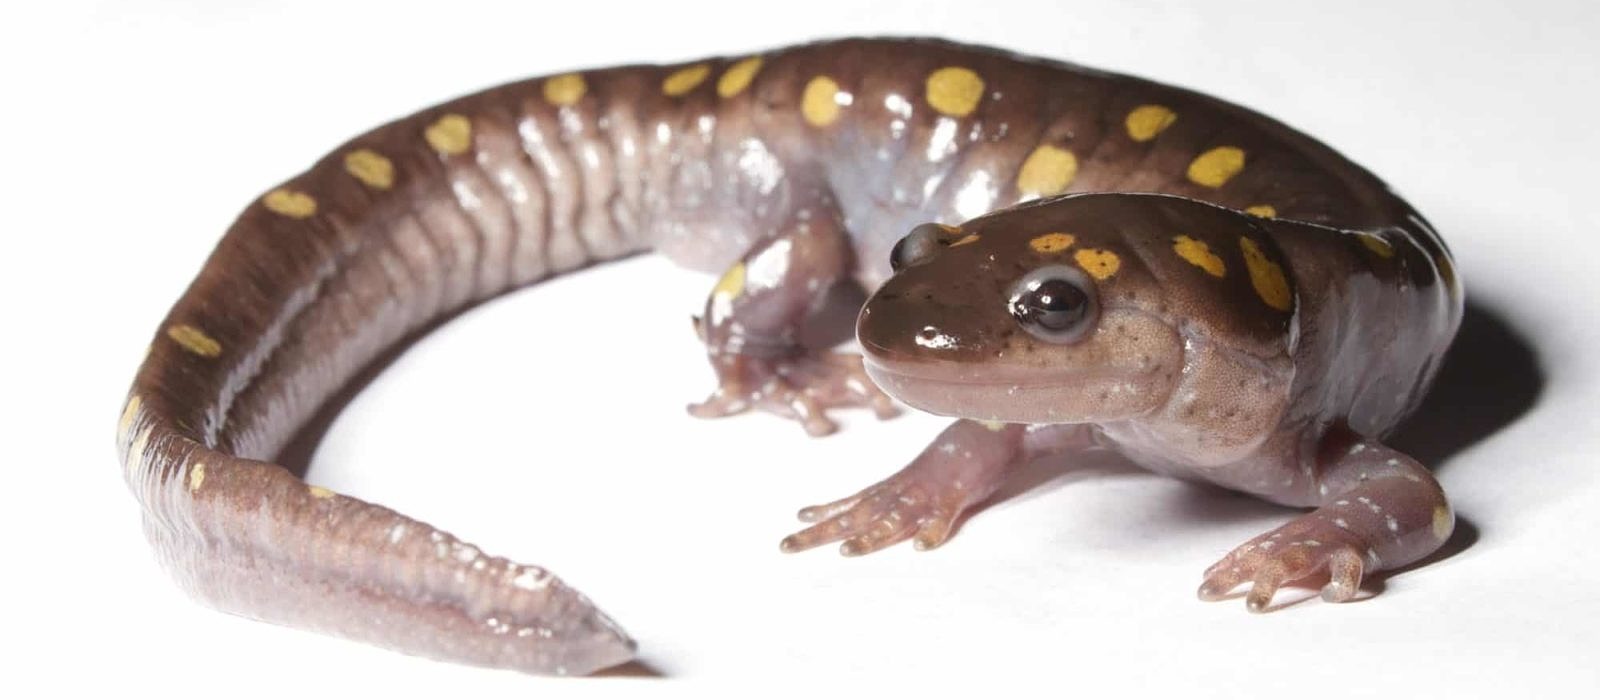 A spotted salamander peers into the depths of your soul. (photo © Brian Gratwicke)